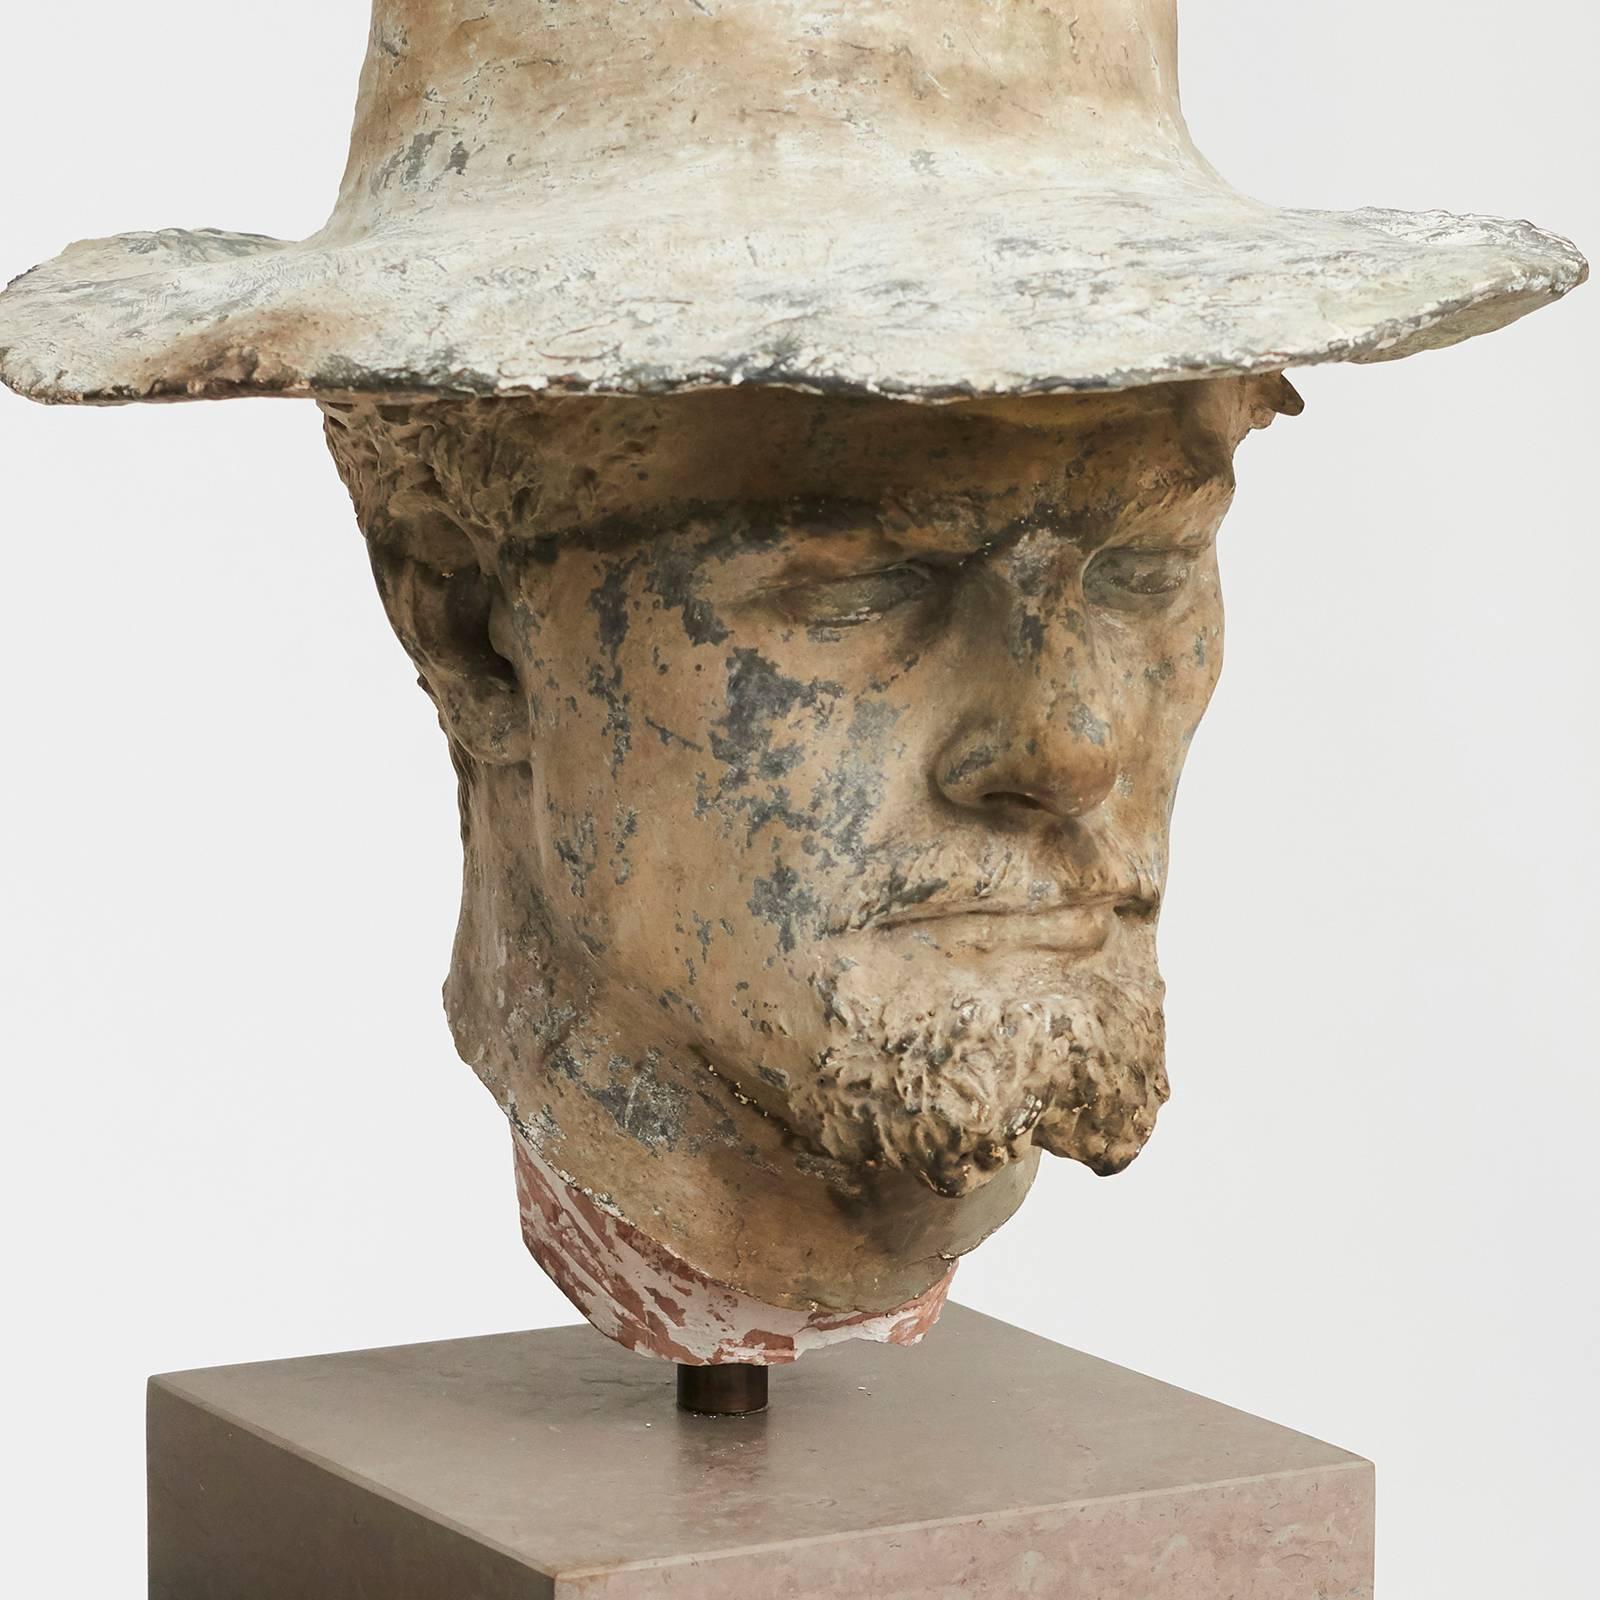 A man’s head (General William Sherman) in patinated plaster by Carl Rohl-Smith. Carl Wilhelm Daniel Rohl-Smith[1] (April 3, 1848- August 20, 1900) was a Danish American sculptor who was active in Europe and the United States from 1870-1900. He